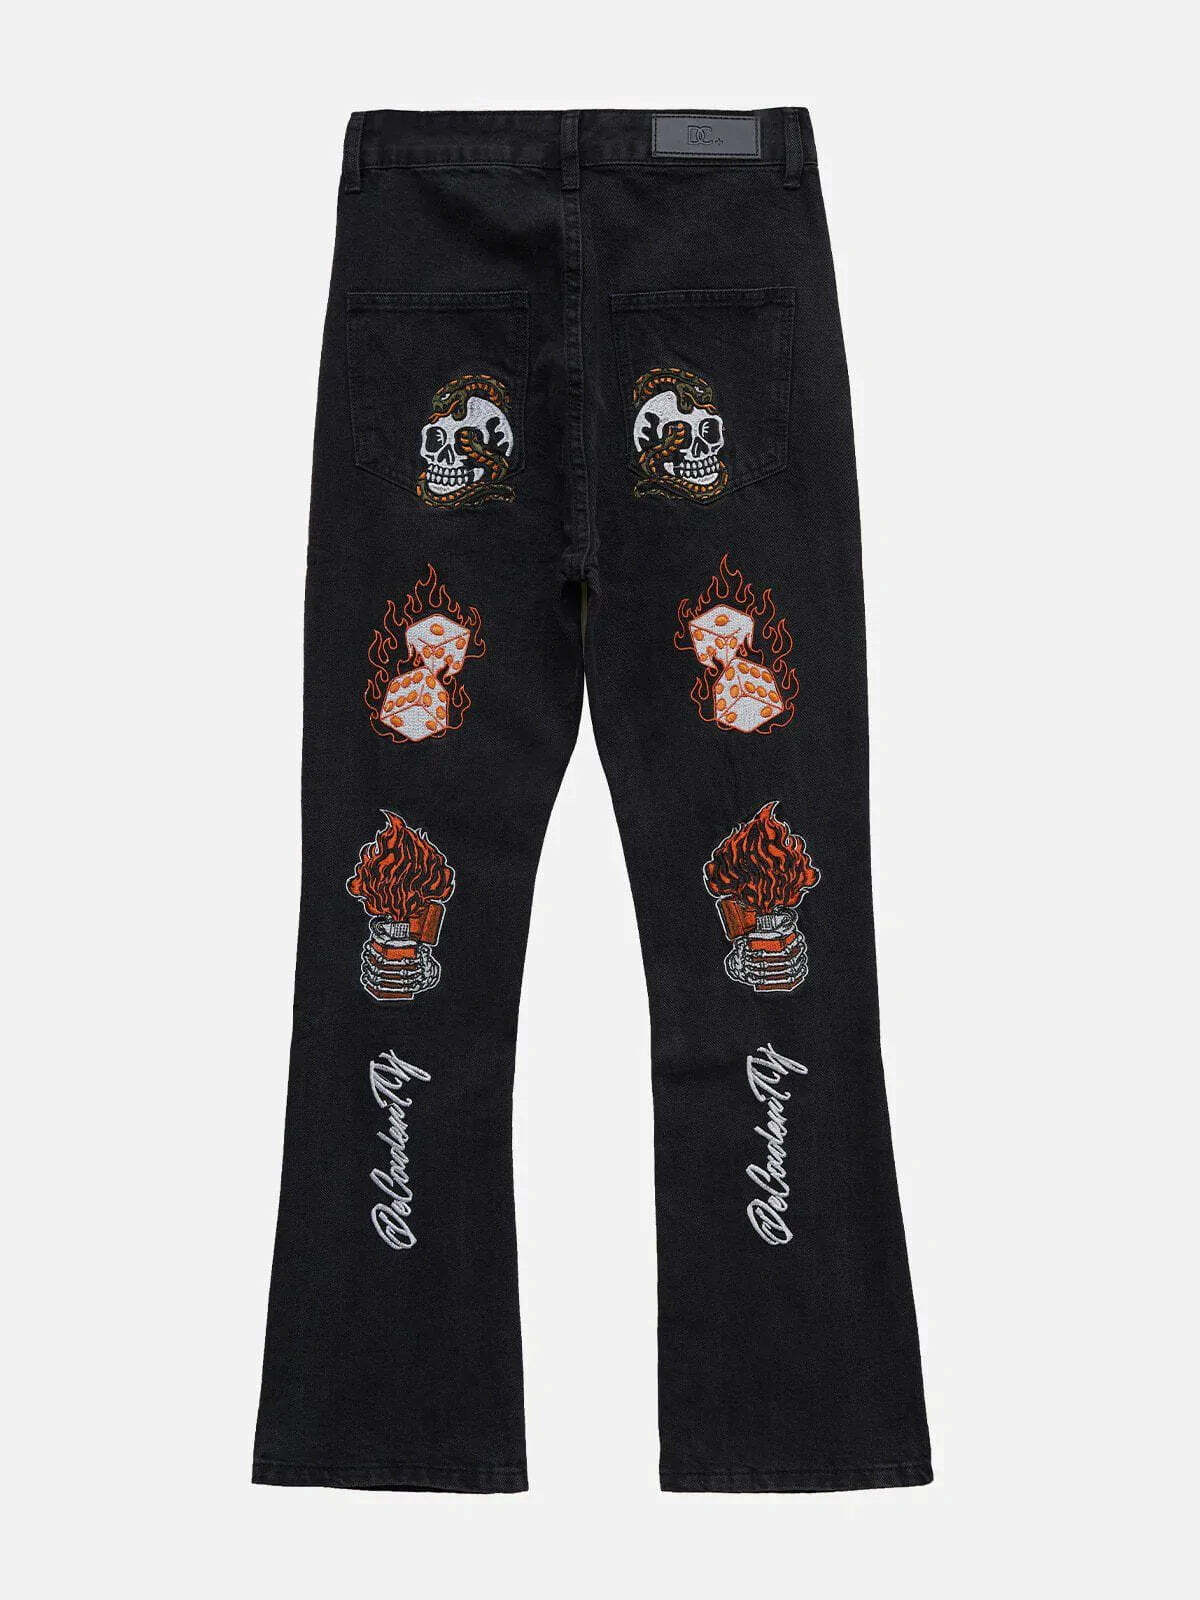 skull embroidered print jeans edgy streetwear icon 5492